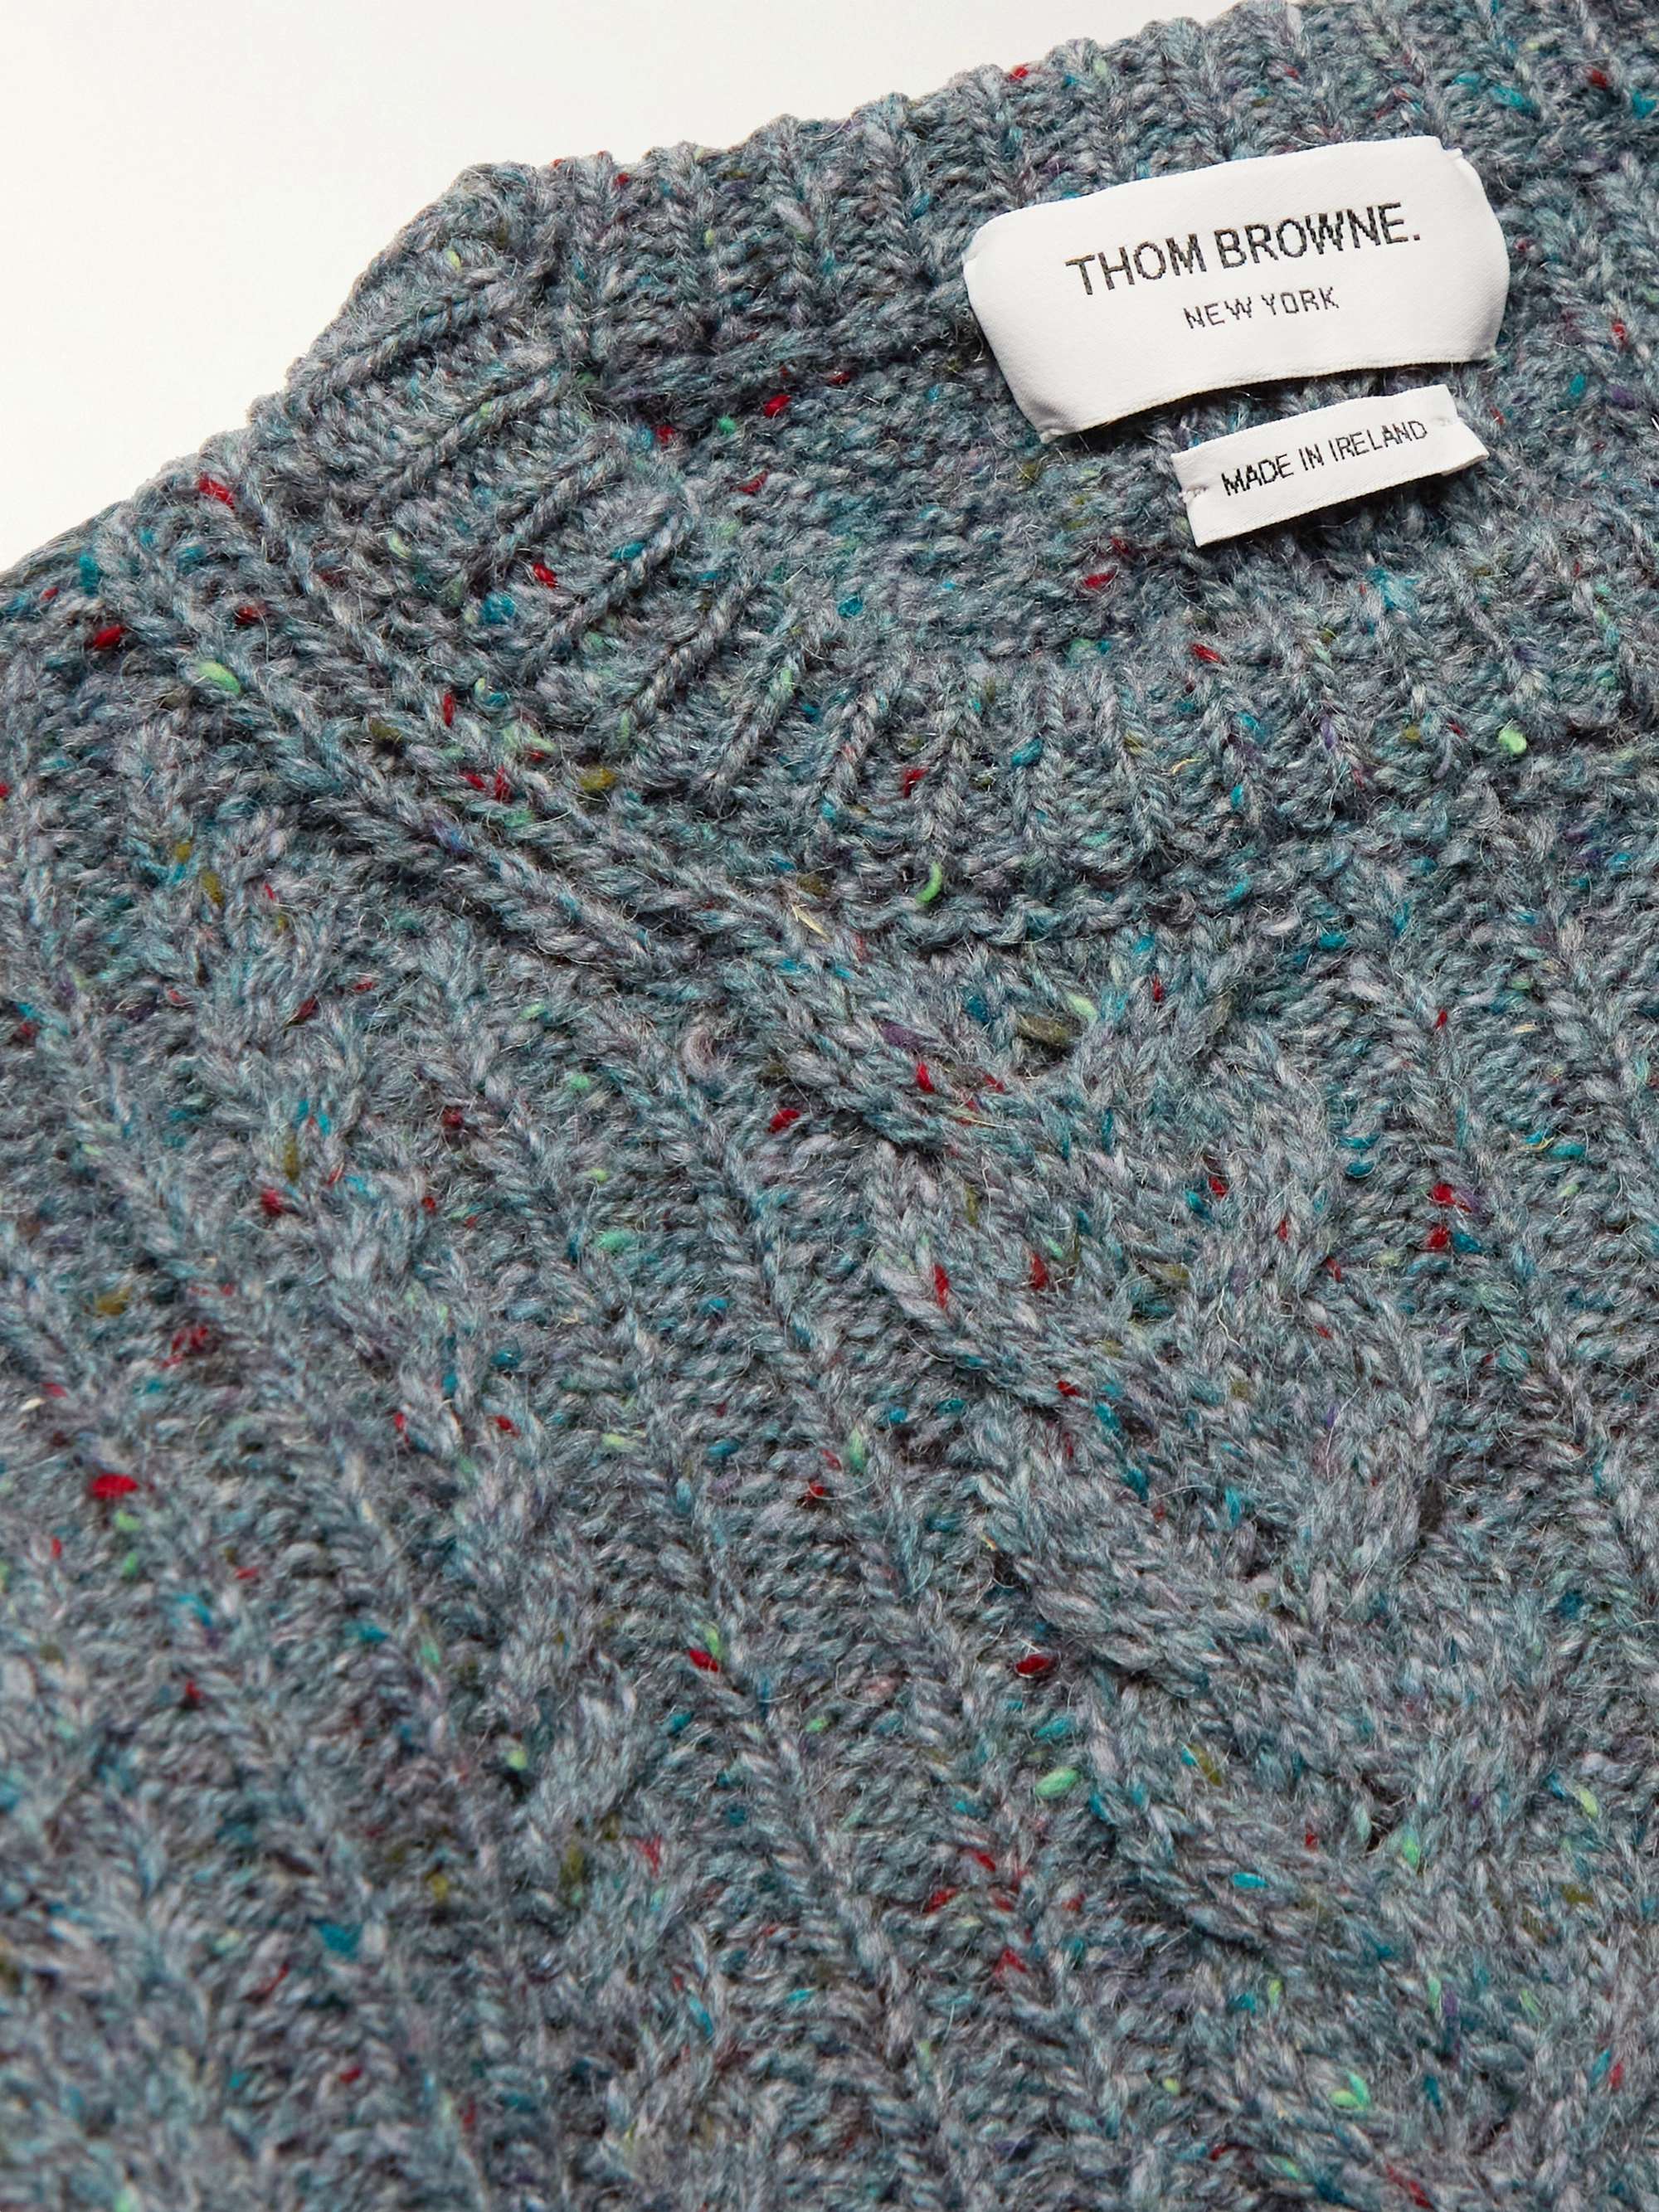 THOM BROWNE Striped Cable-Knit Wool And Mohair-Blend Sweater